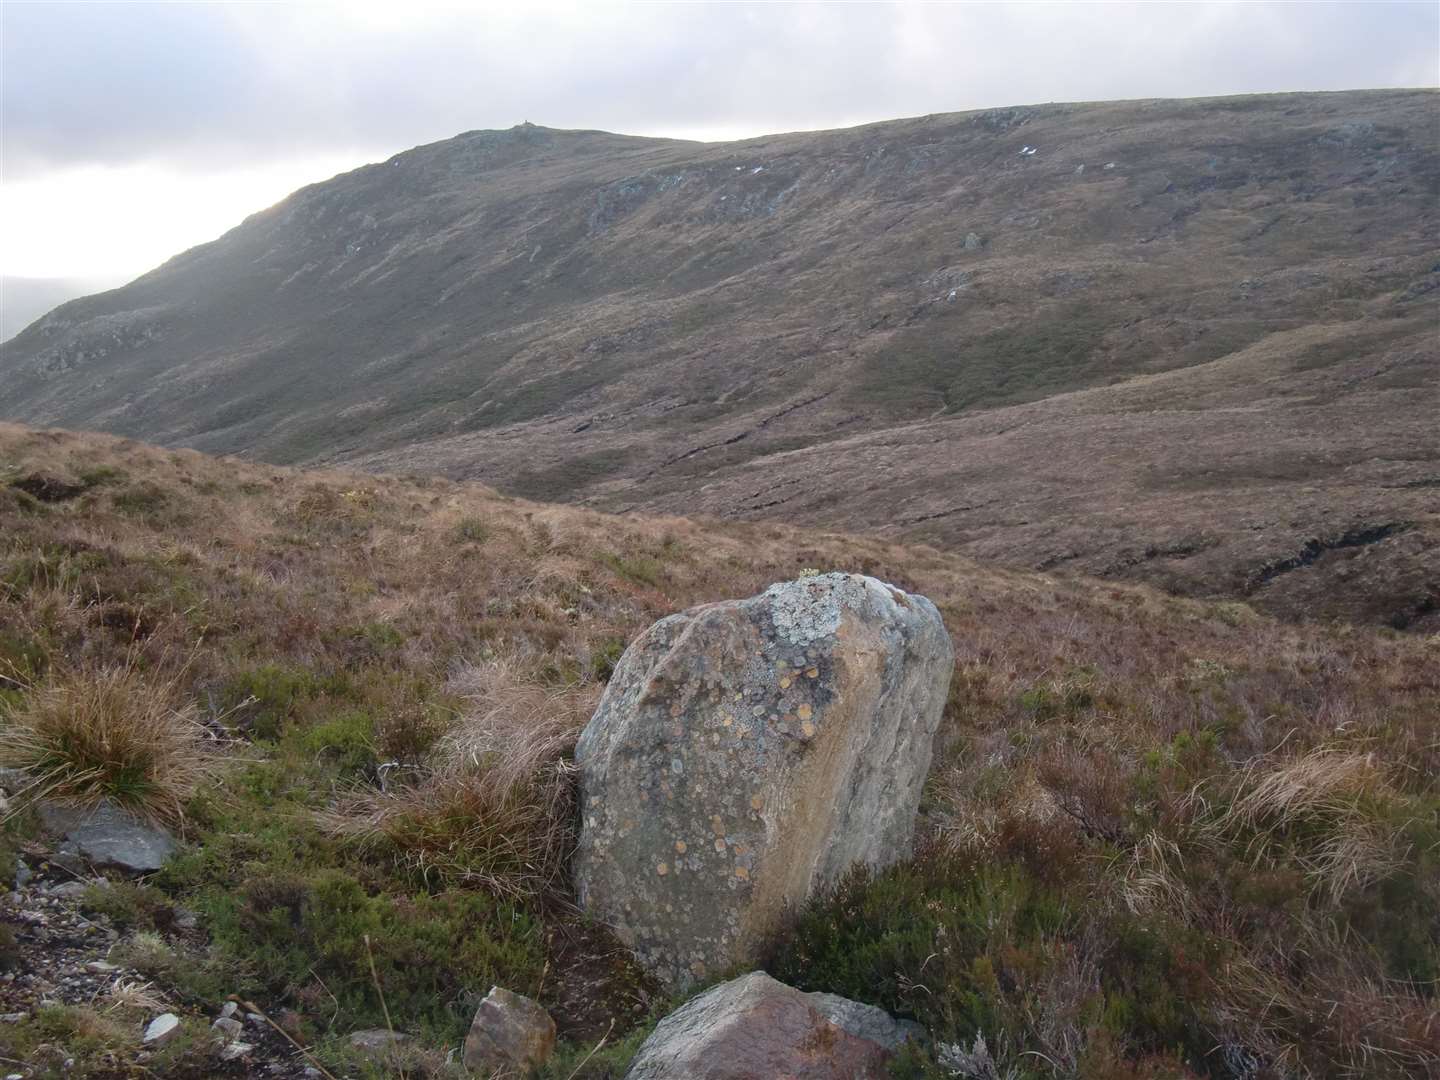 The trig point on Carn na Coinnich from the point where we left the track.